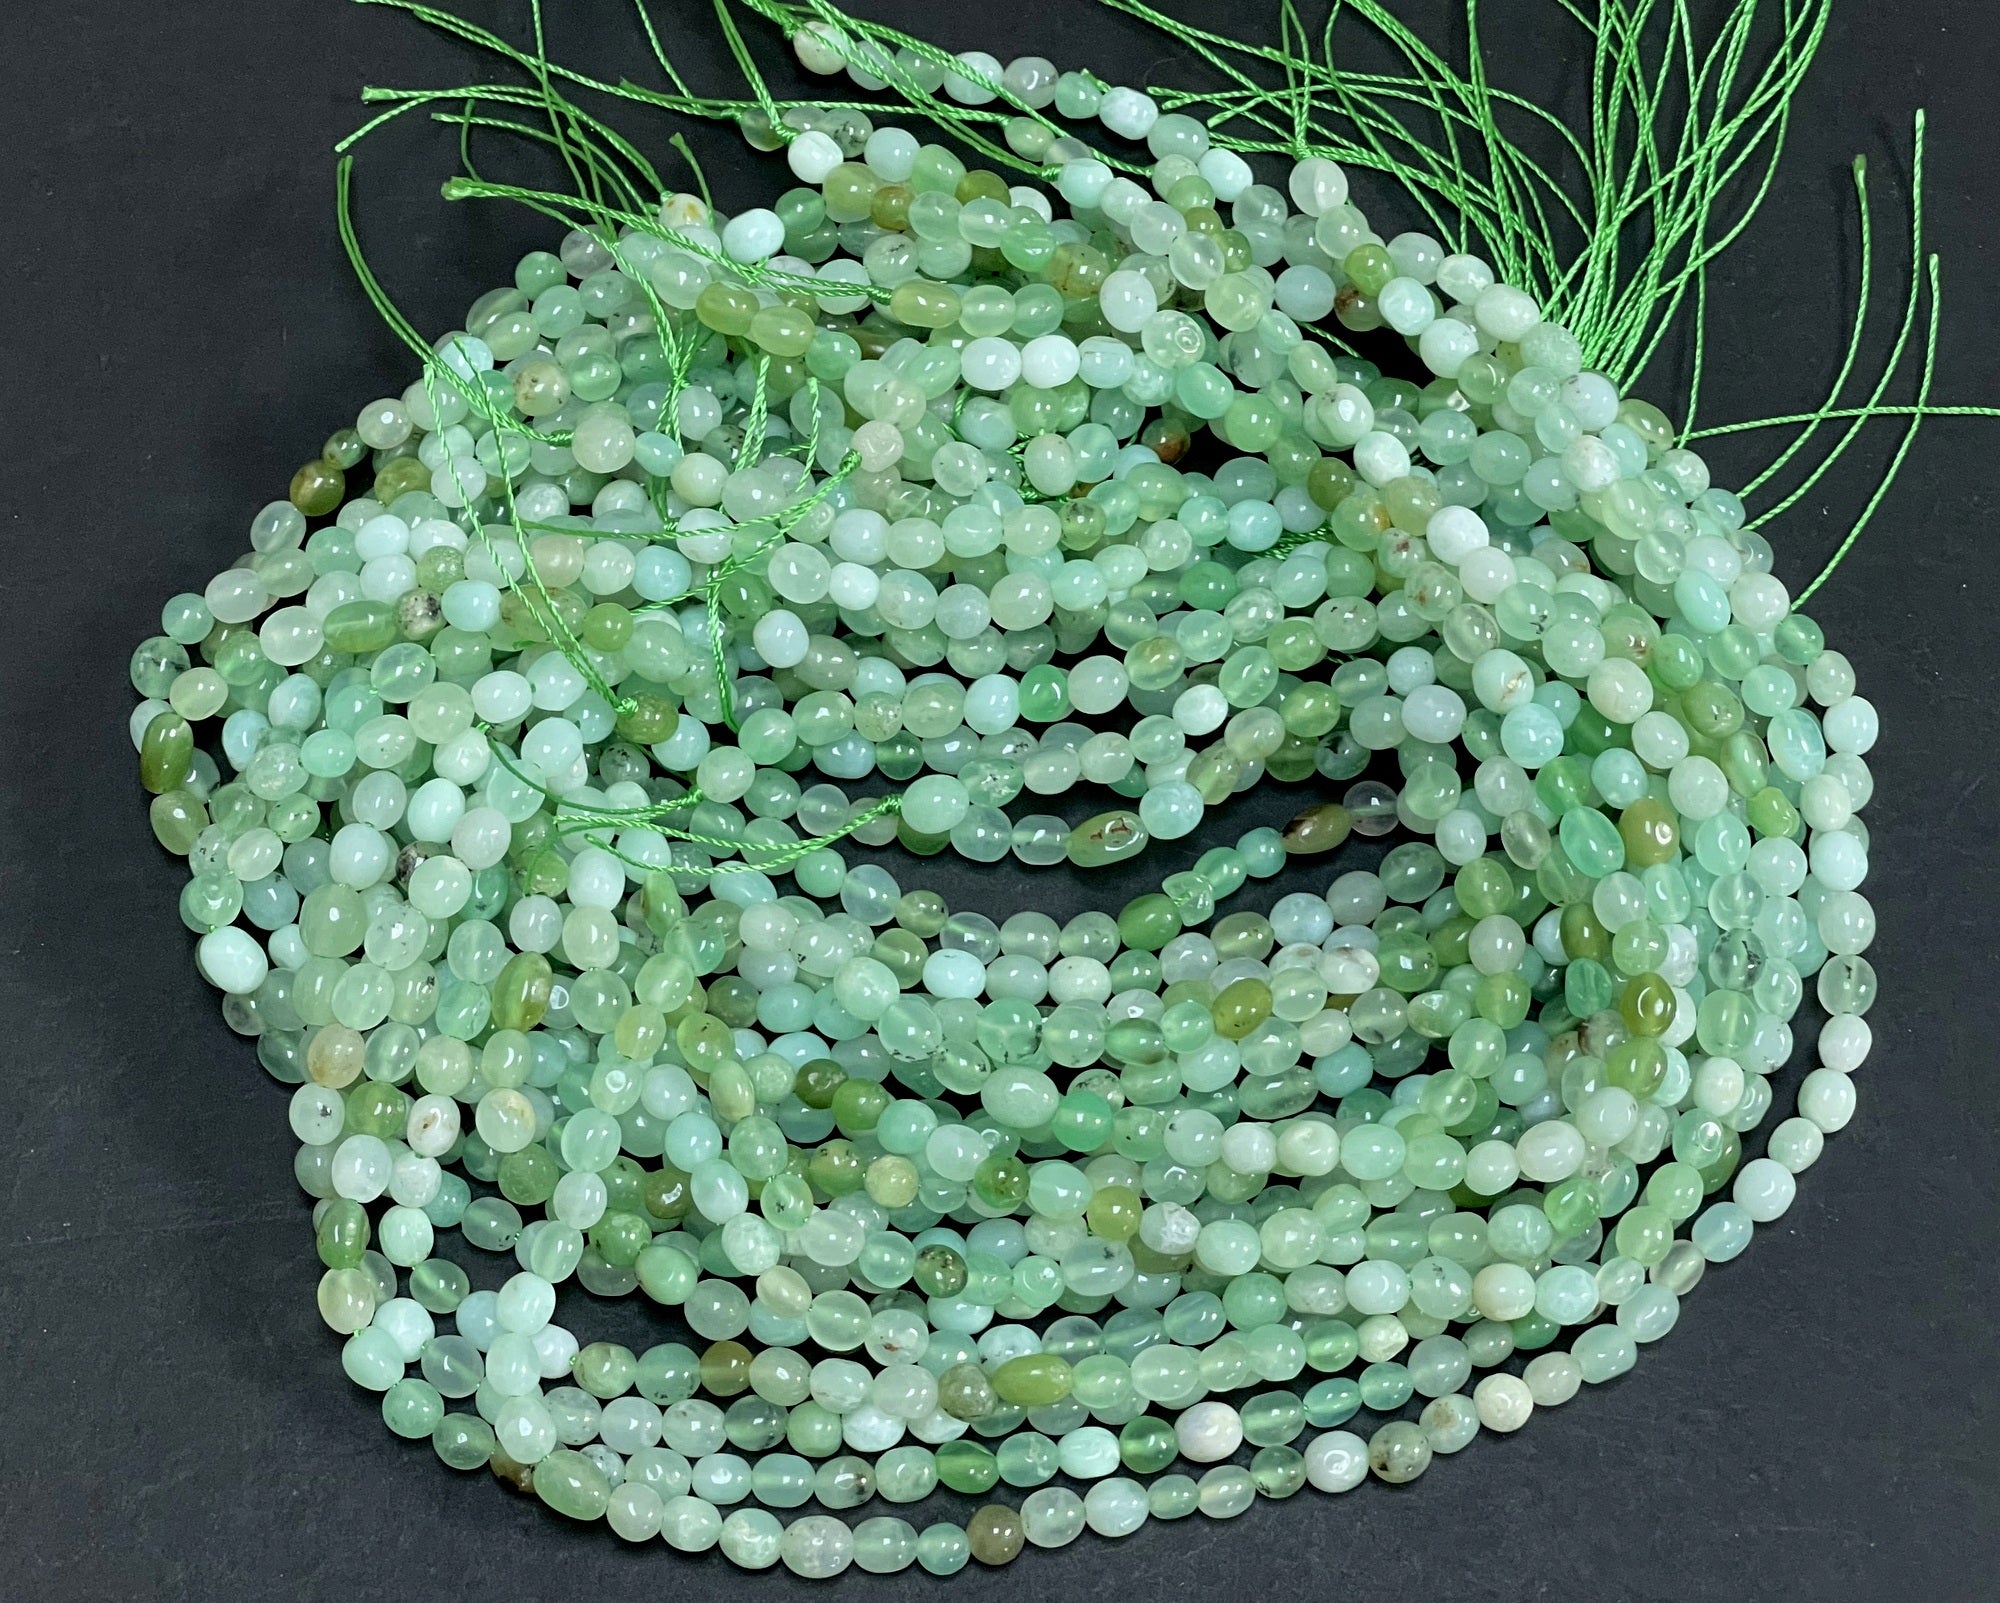 Chrysoprase 5-6mm tiny nuggets mint apple green natural gemstone beads 16" strand - Oz Beads 